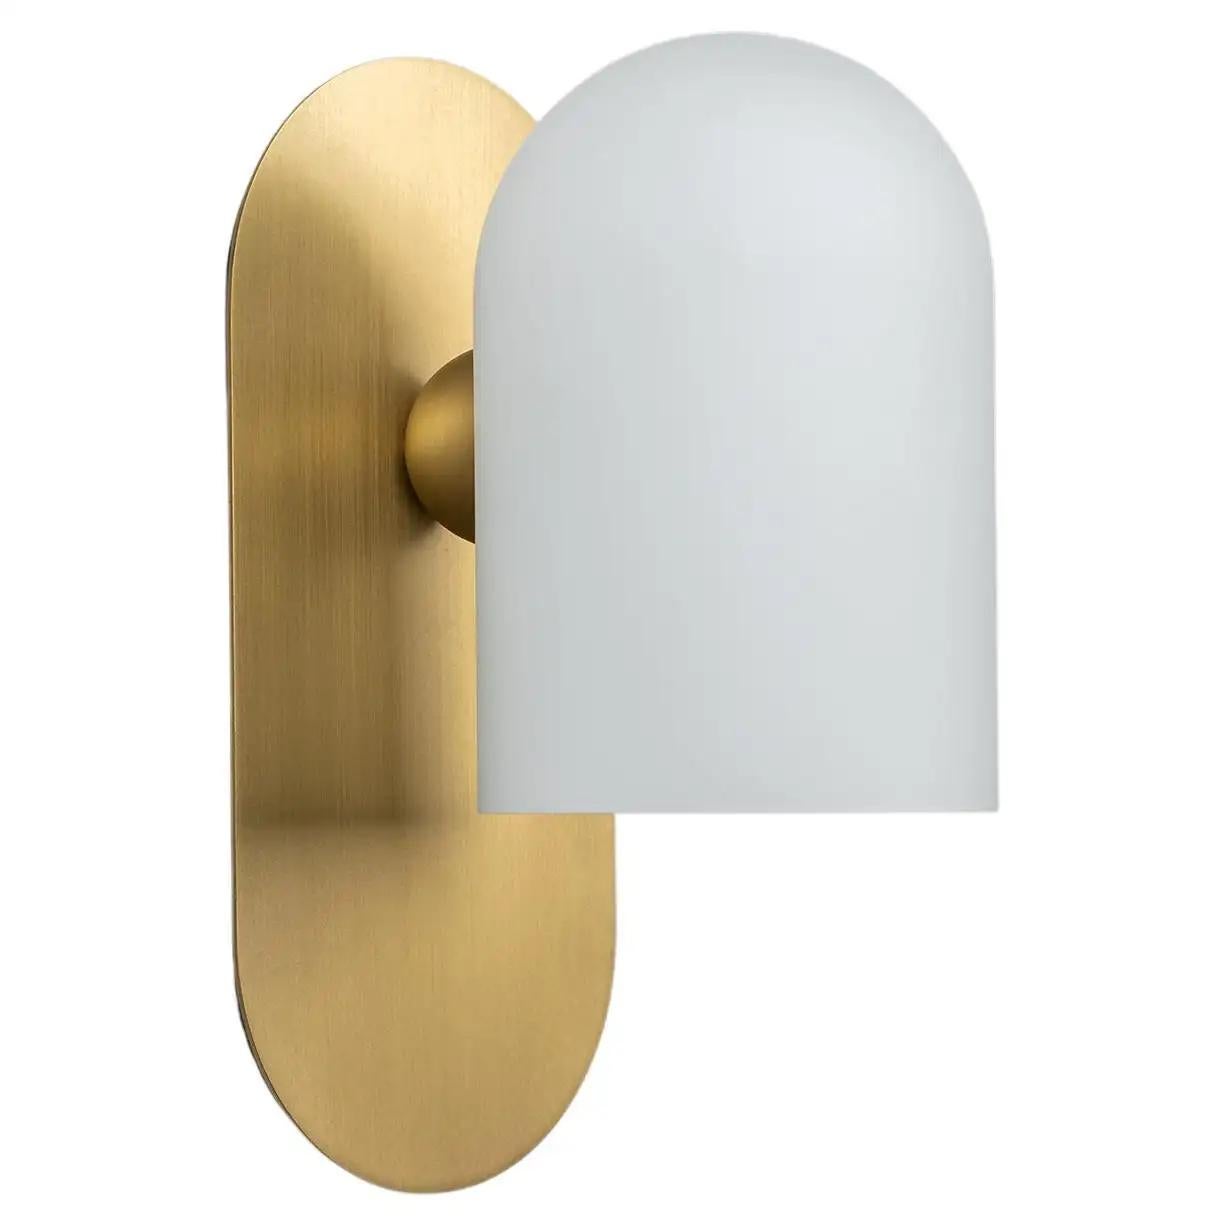 Brass small sconce by Schwung.
Dimensions: W 10.5 x D 14 x H 23 cm
Materials: brass, frosted glass.

Finishes available: black gunmetal, polished nickel, brass.


Schwung is a German word, and loosely defined, means energy or momentumm of a